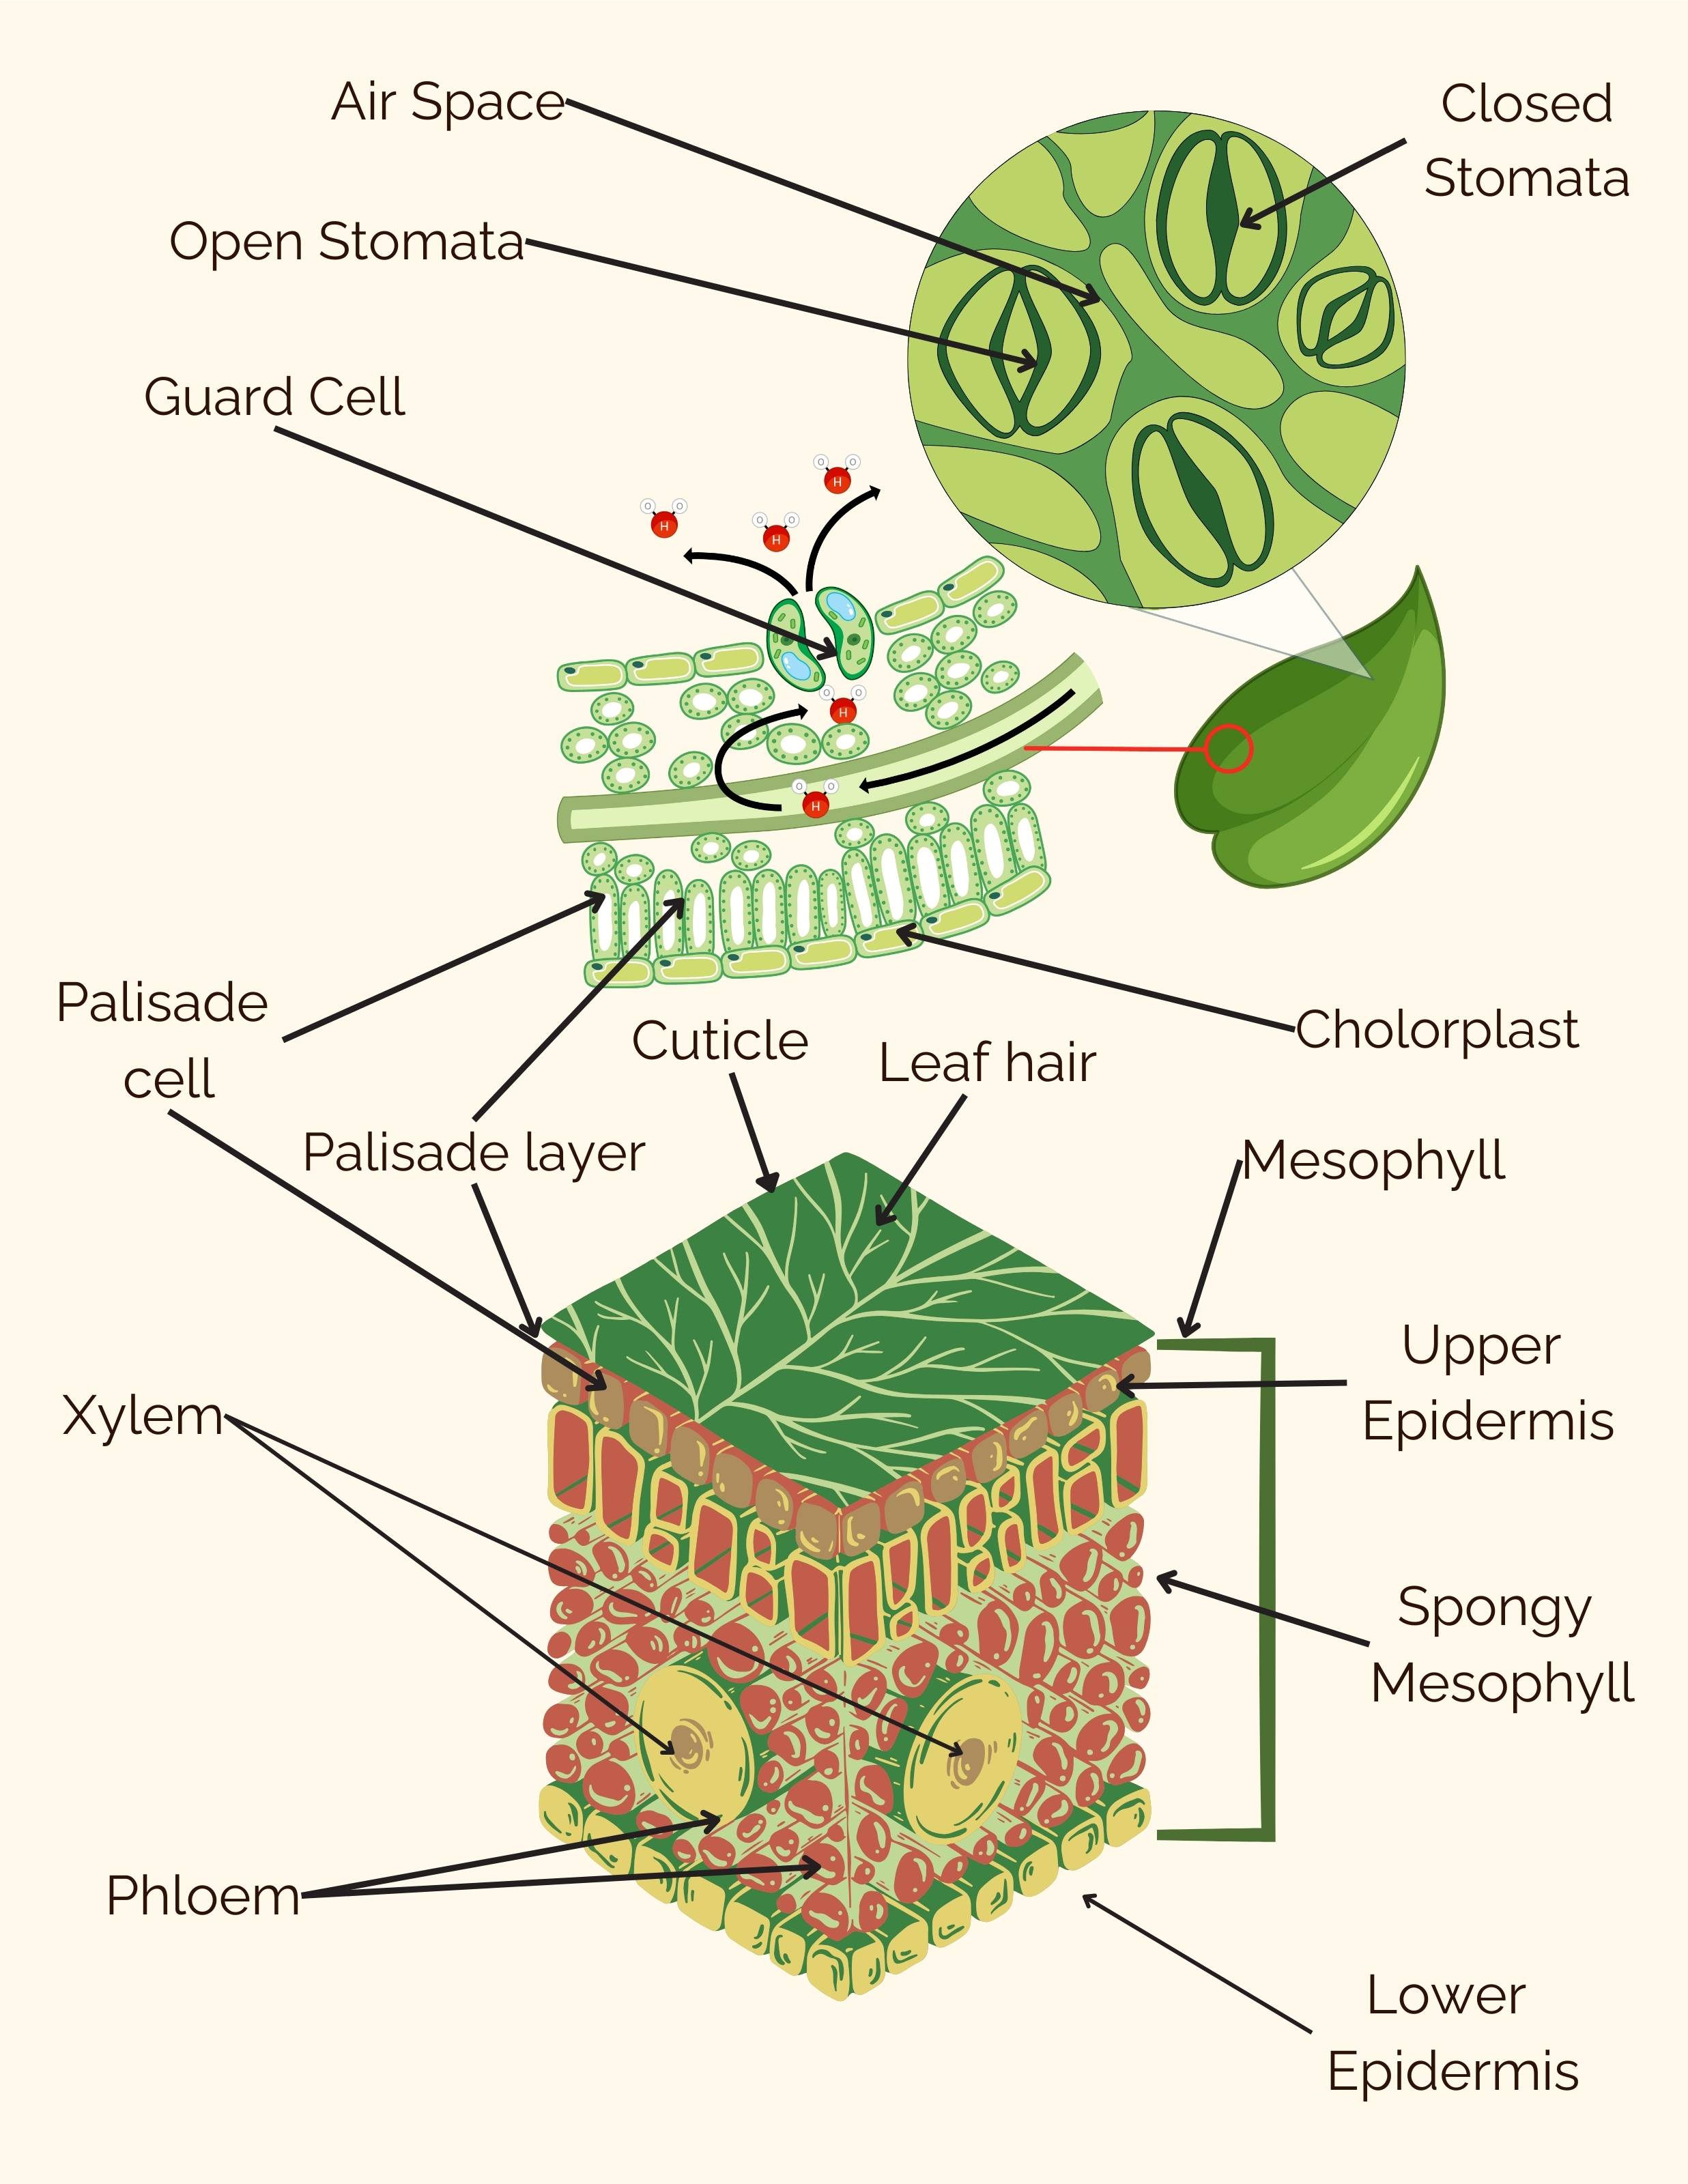 Detailed illustration of the inner workings of a leaf with definitions for the following words: Air Space, Cholorplast, Closed Stomata, Cuticle, Guard Cell, Guard Cell,
            Leaf Hair, Lower Epidermis, Mesophyll, Palisade cell, Palisade Layer, Phloem, Spongy Mesophyll, Upper Epidermis, Xylem.